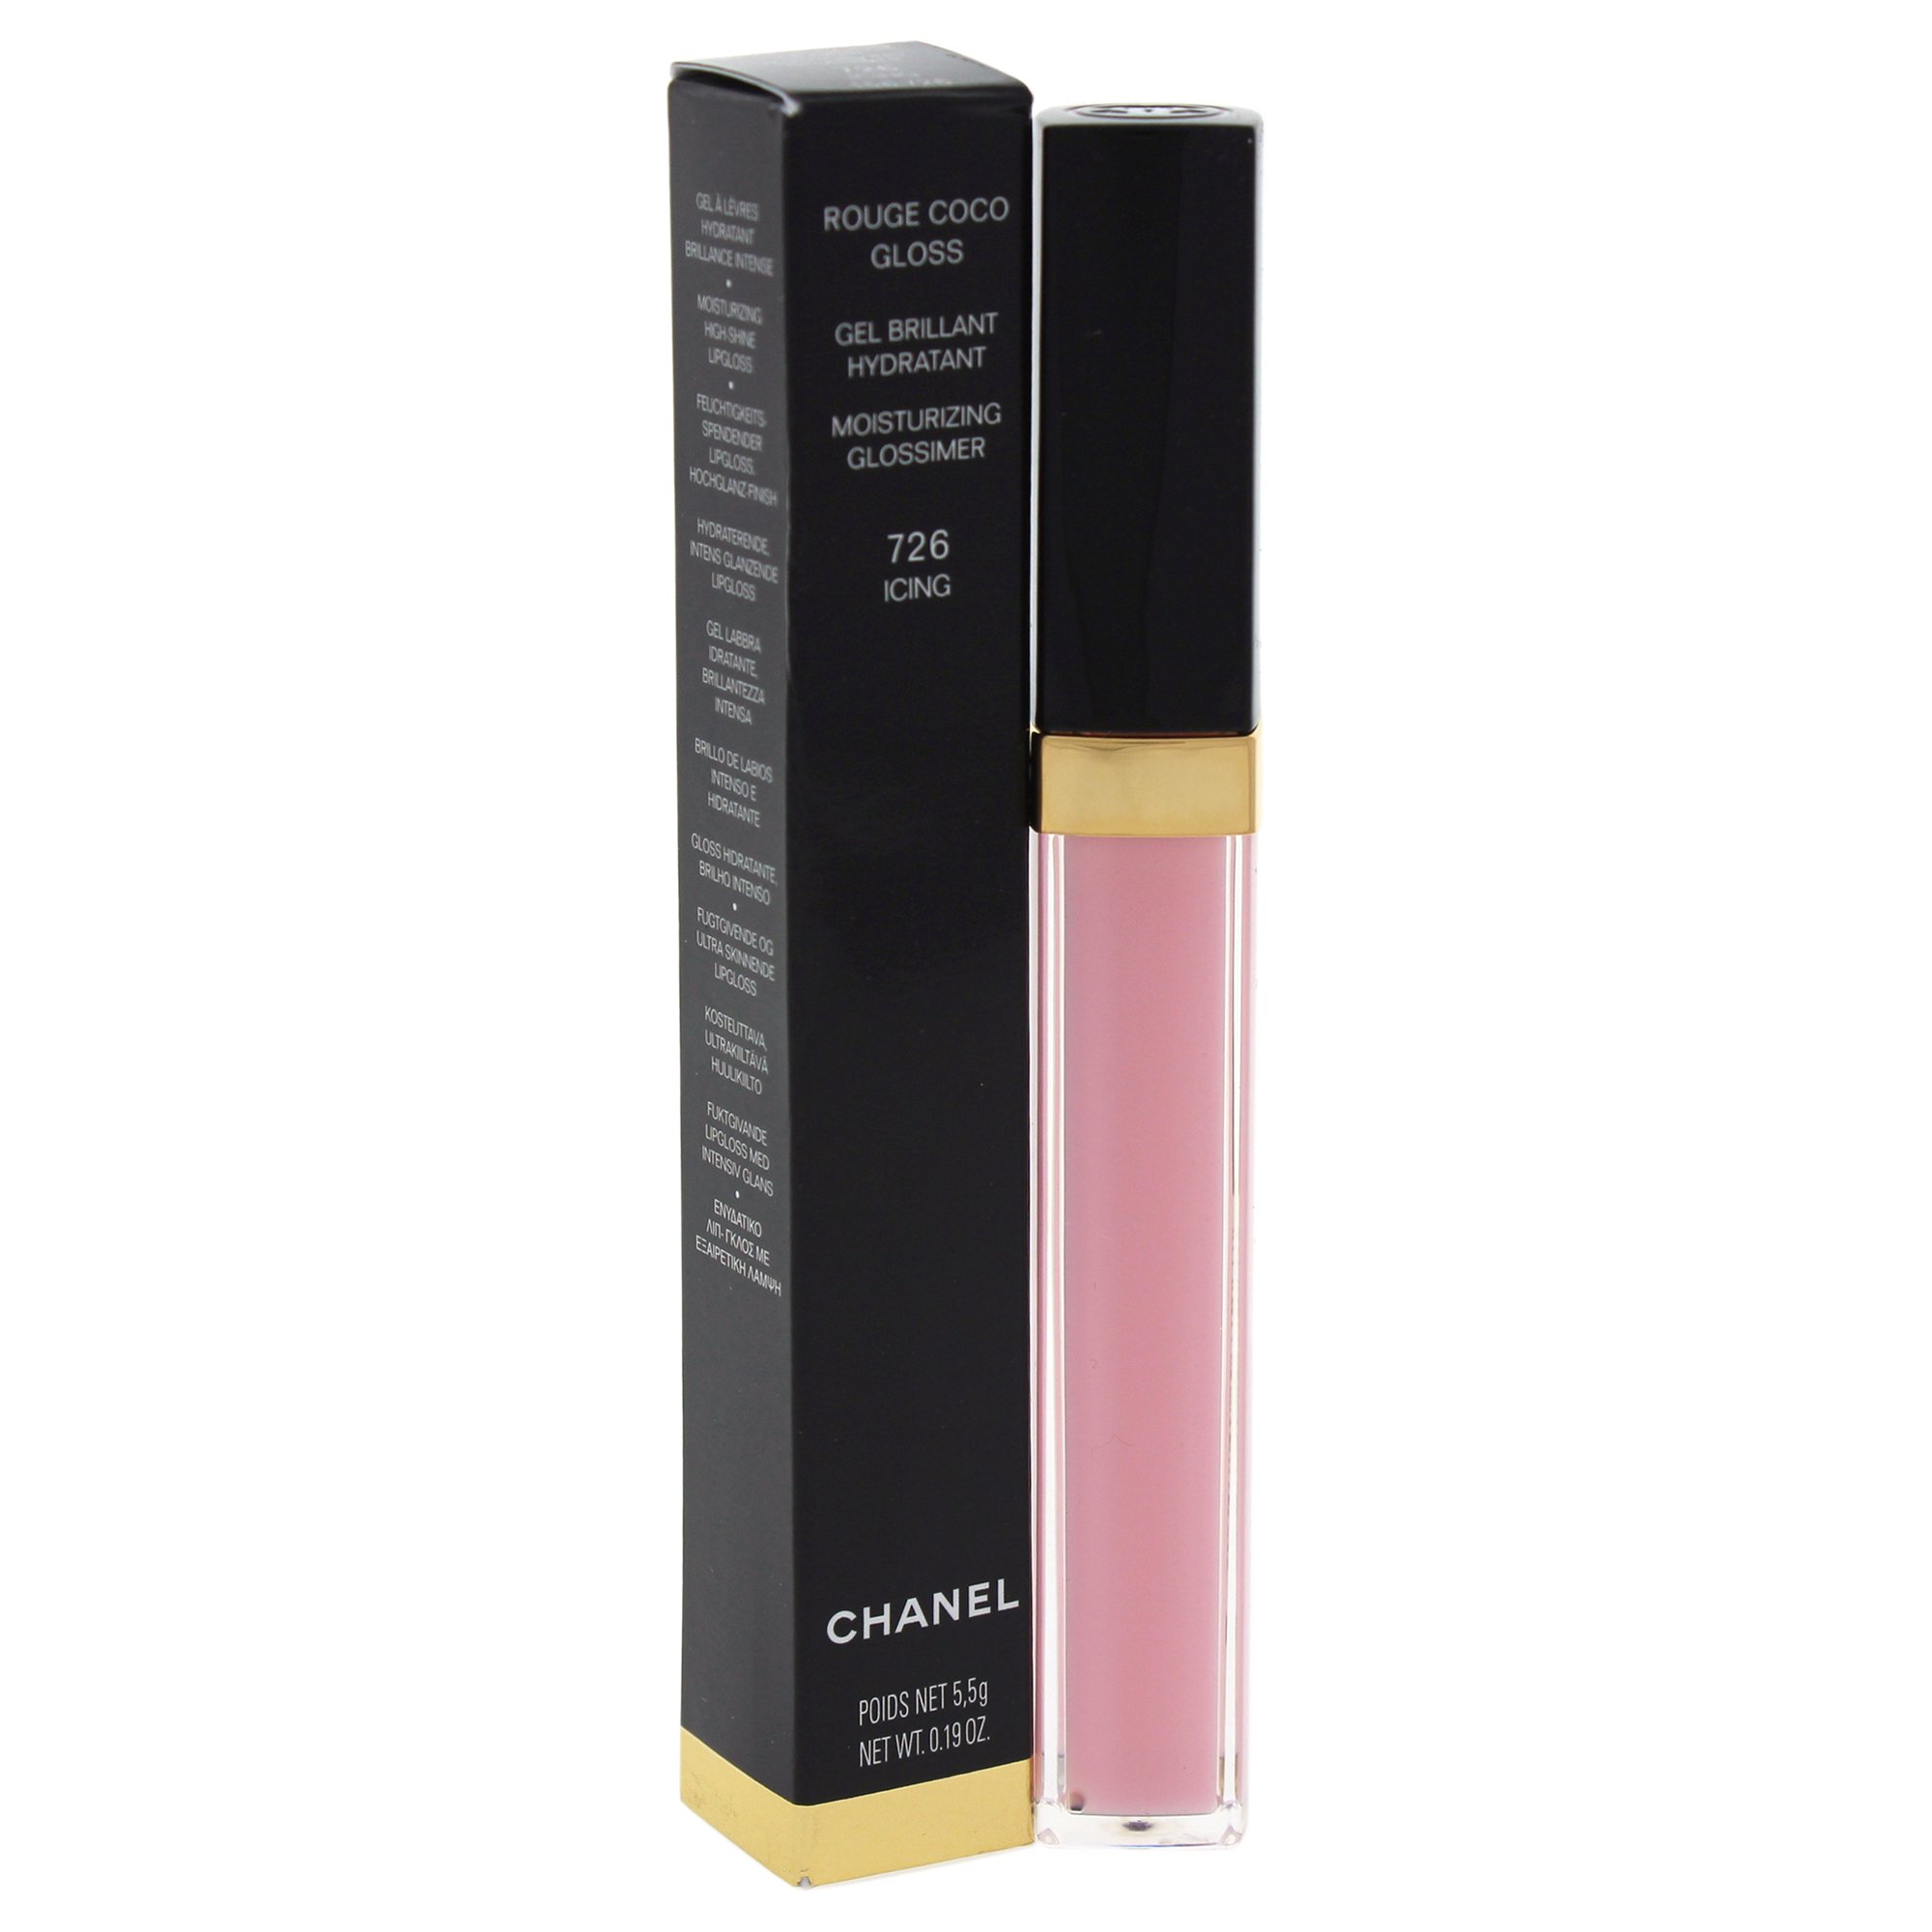 CHANEL LES BEIGES Healthy Glow Lip Balm  Medium Watch 7 Reviews on  Supergreat